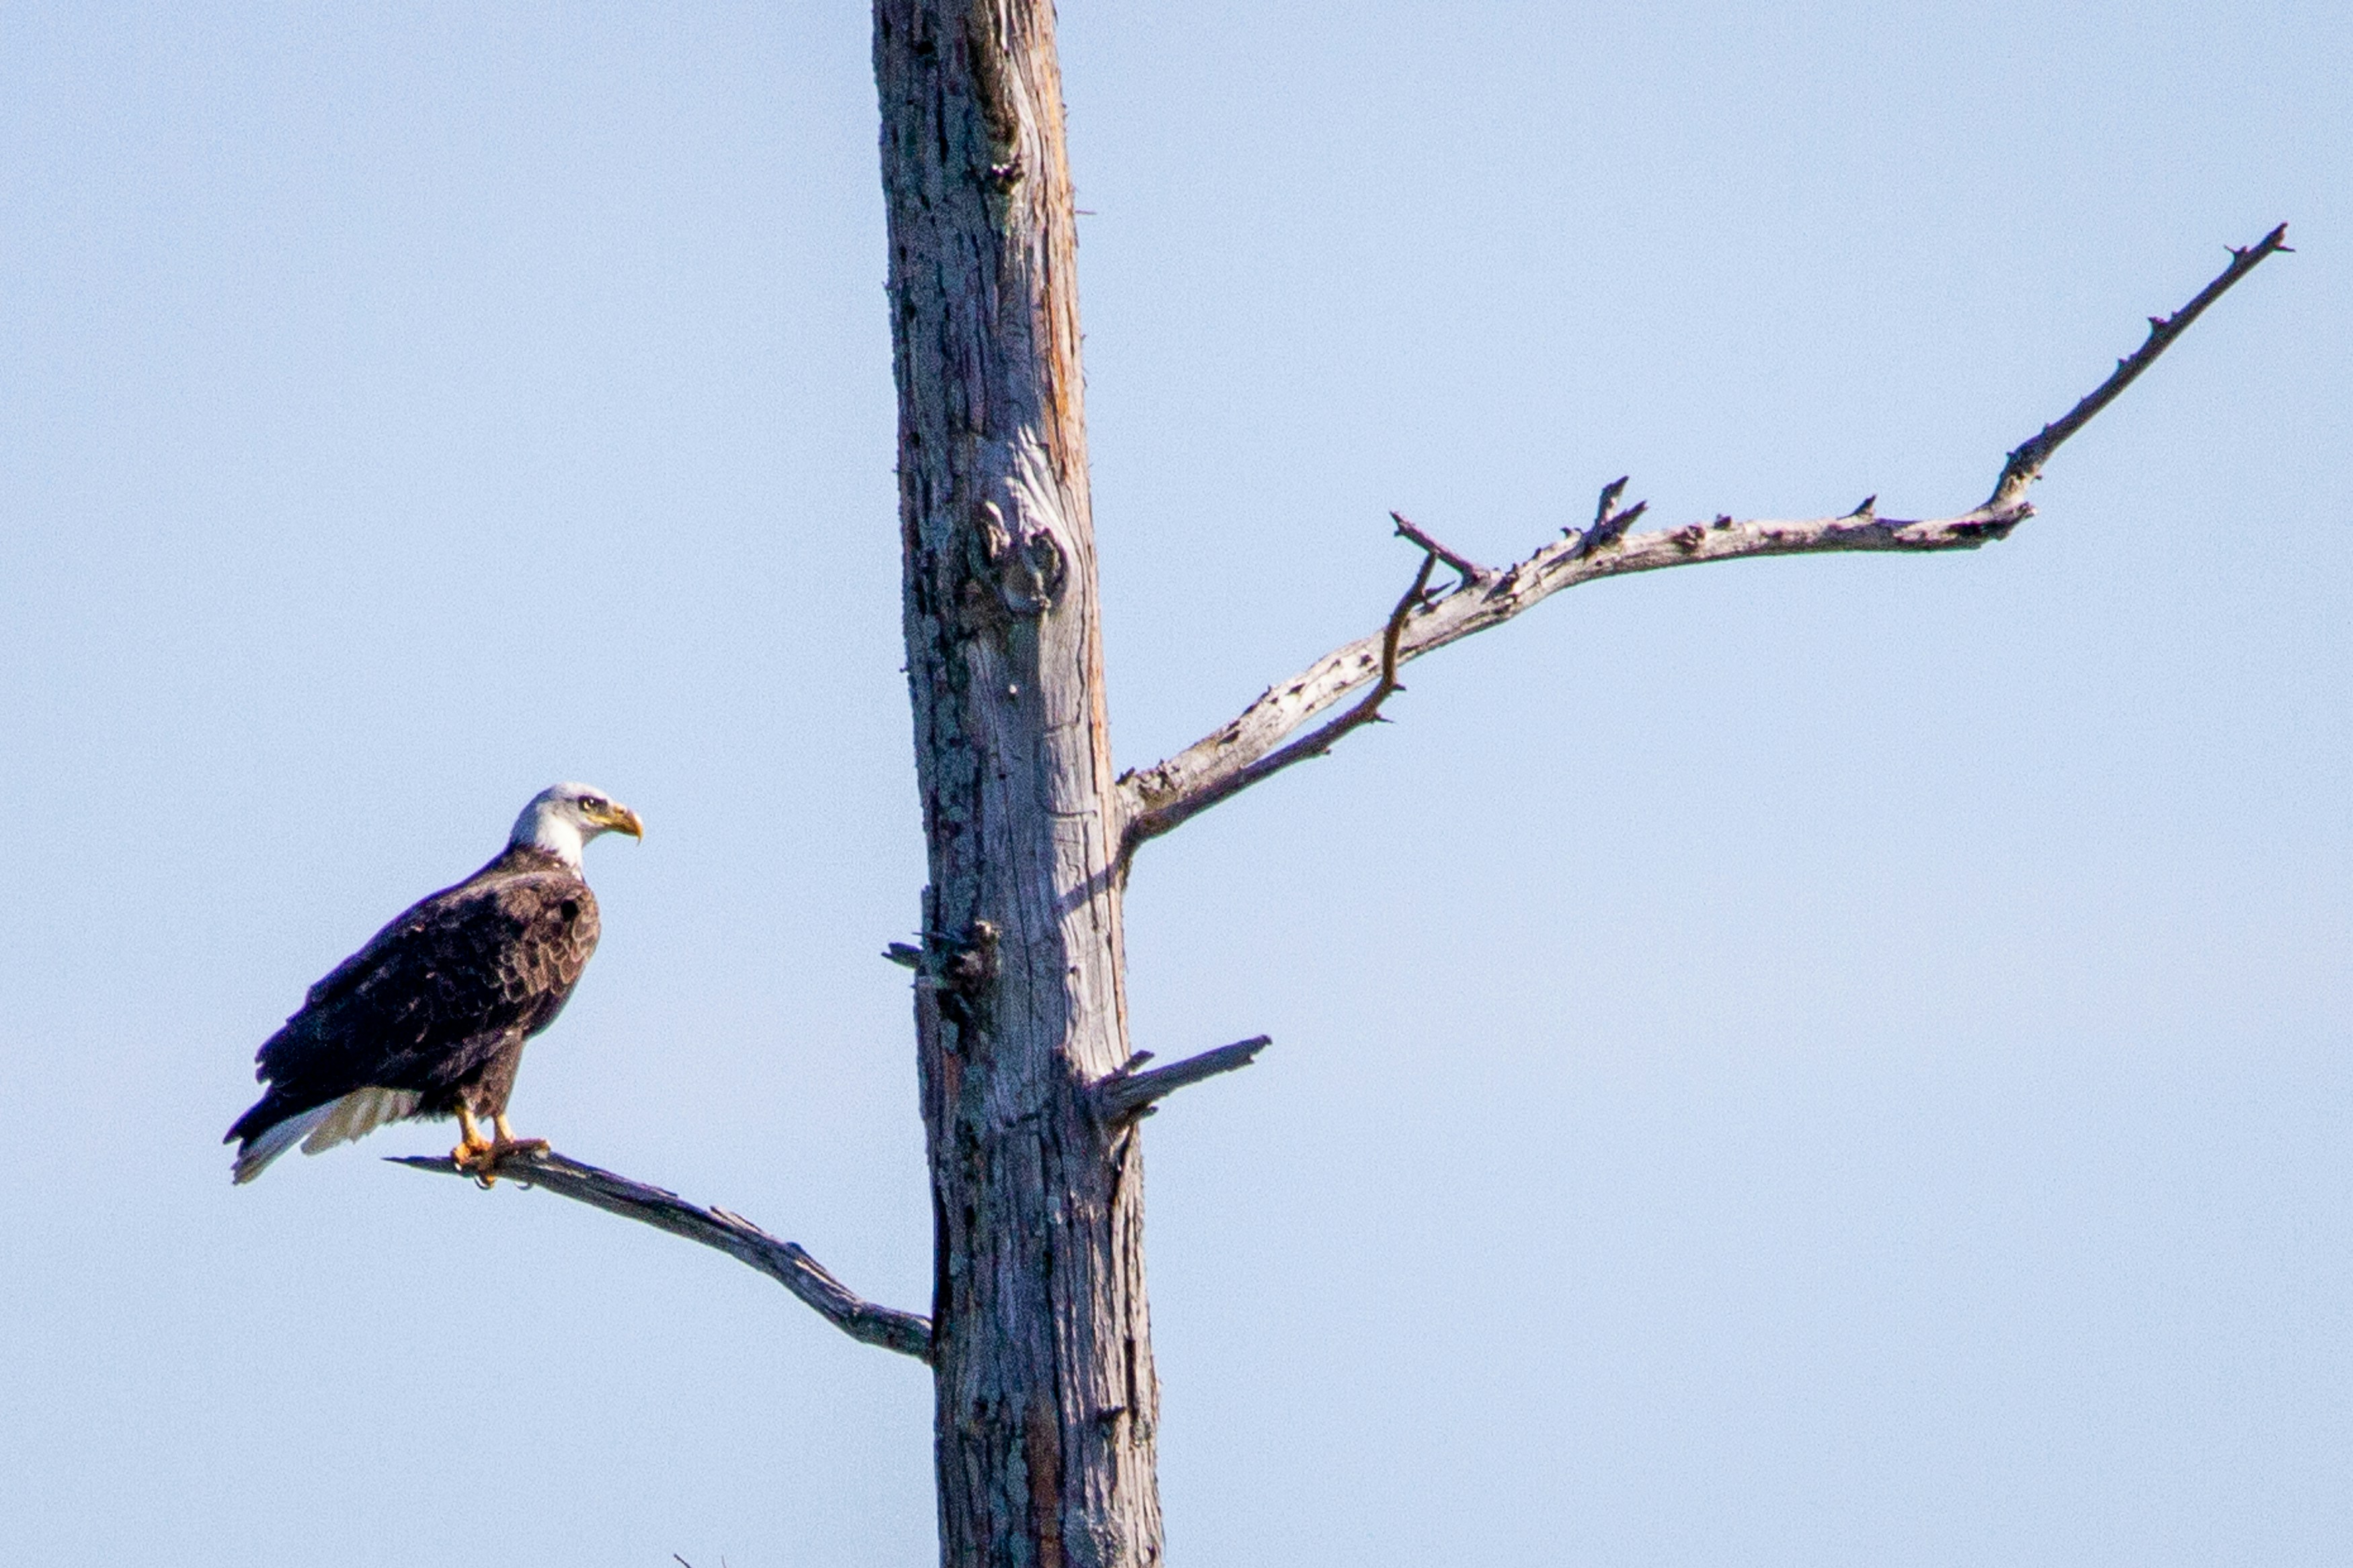 A bald eagle perched at the top of the cypress tree.